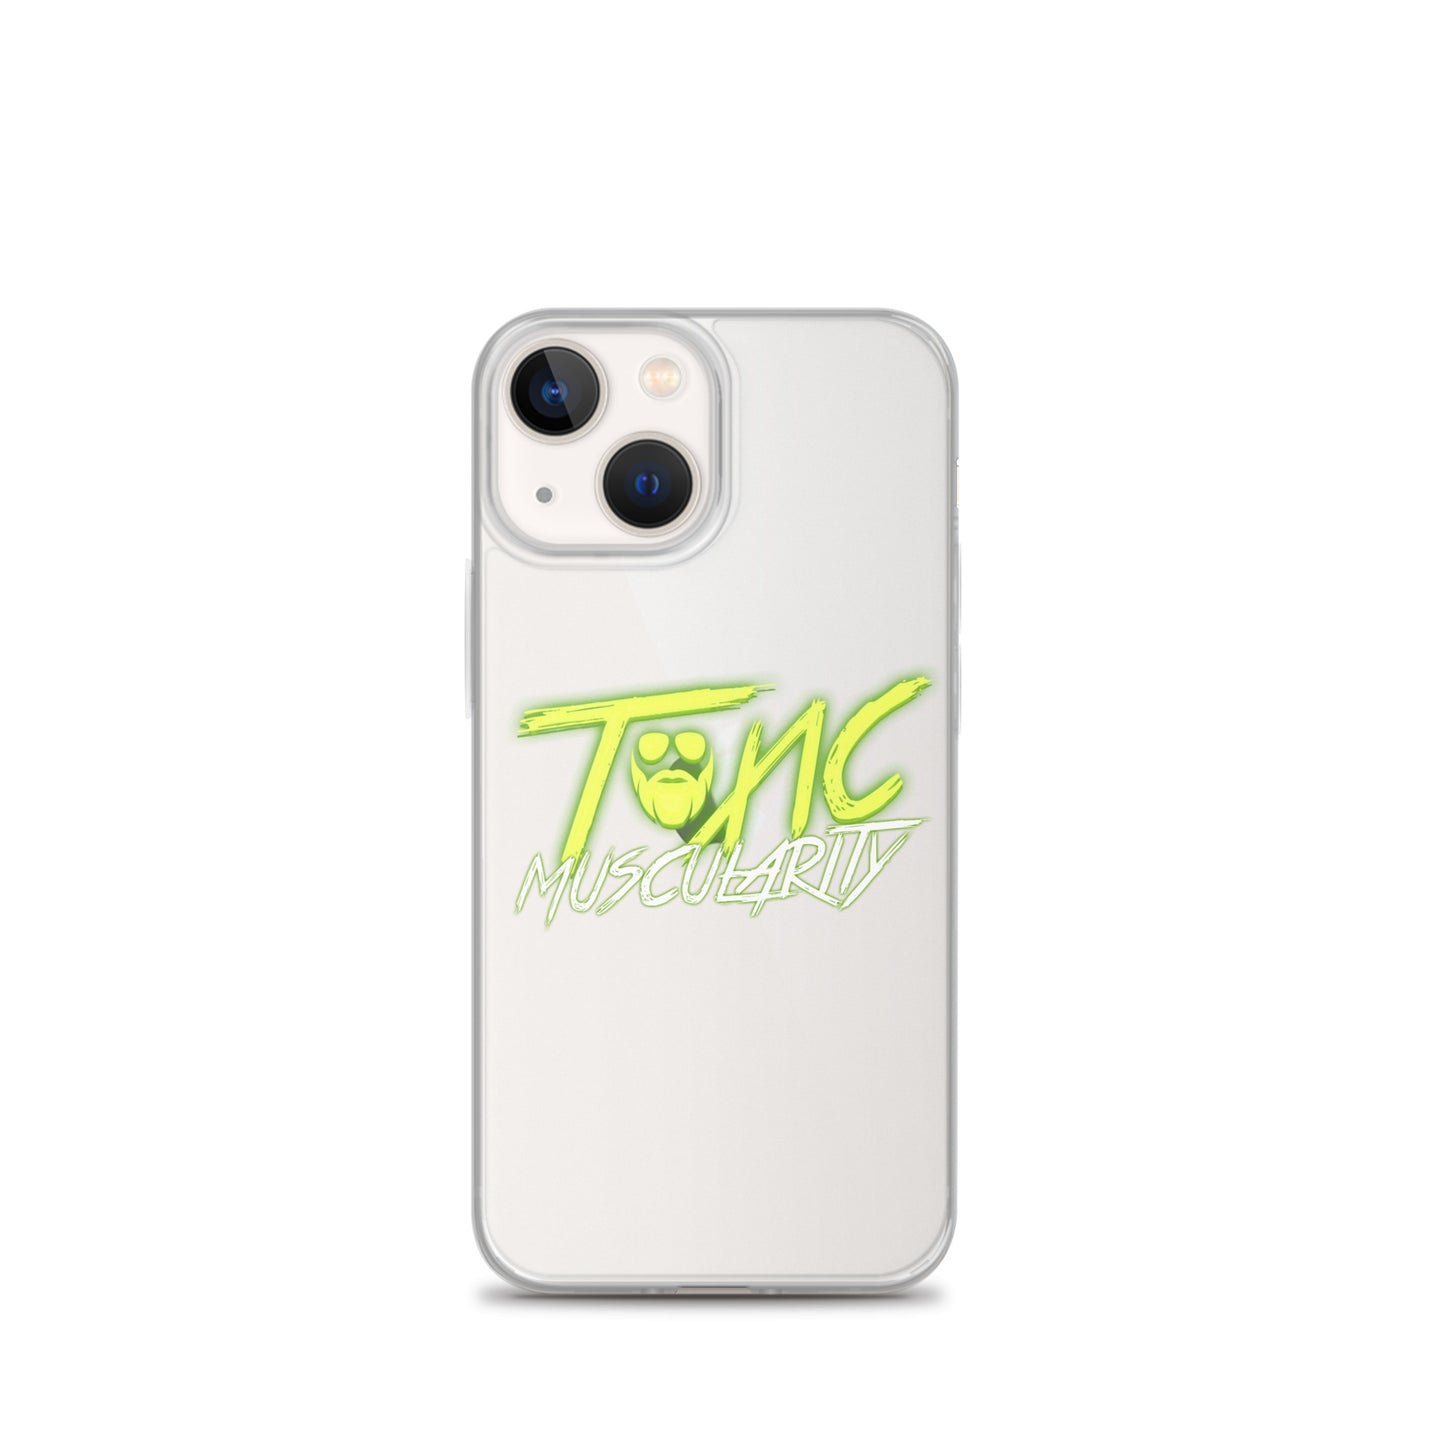 Toxic Muscularity iPhone Case